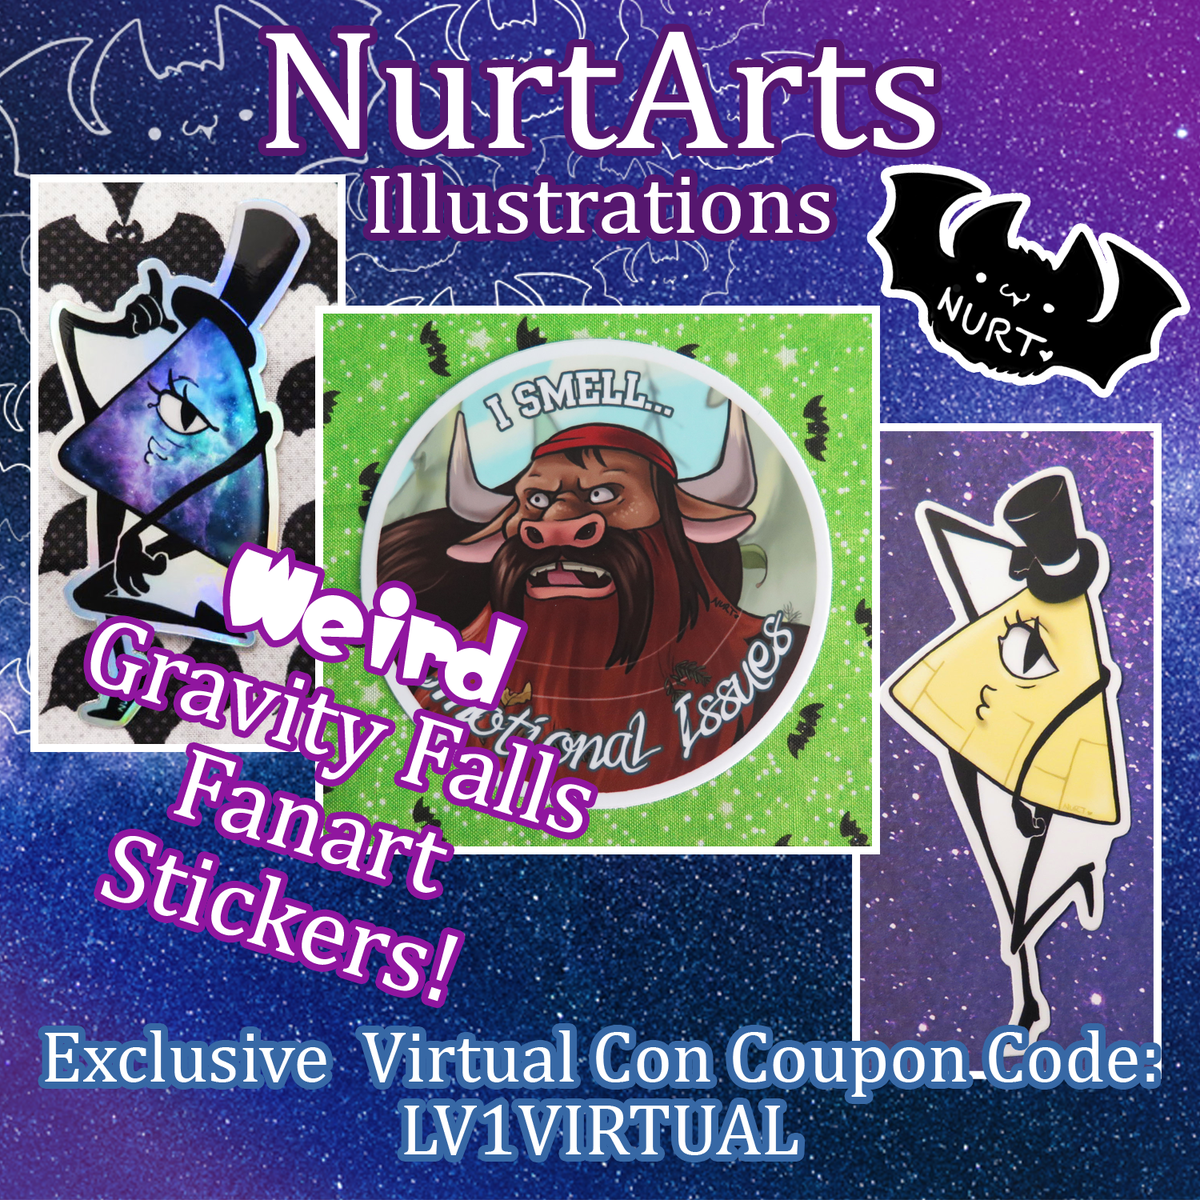 I goofed on this post in the FB event. Check it out anyway!
facebook.com/events/6487058…
#Virtualartistalley #Virtualminicon